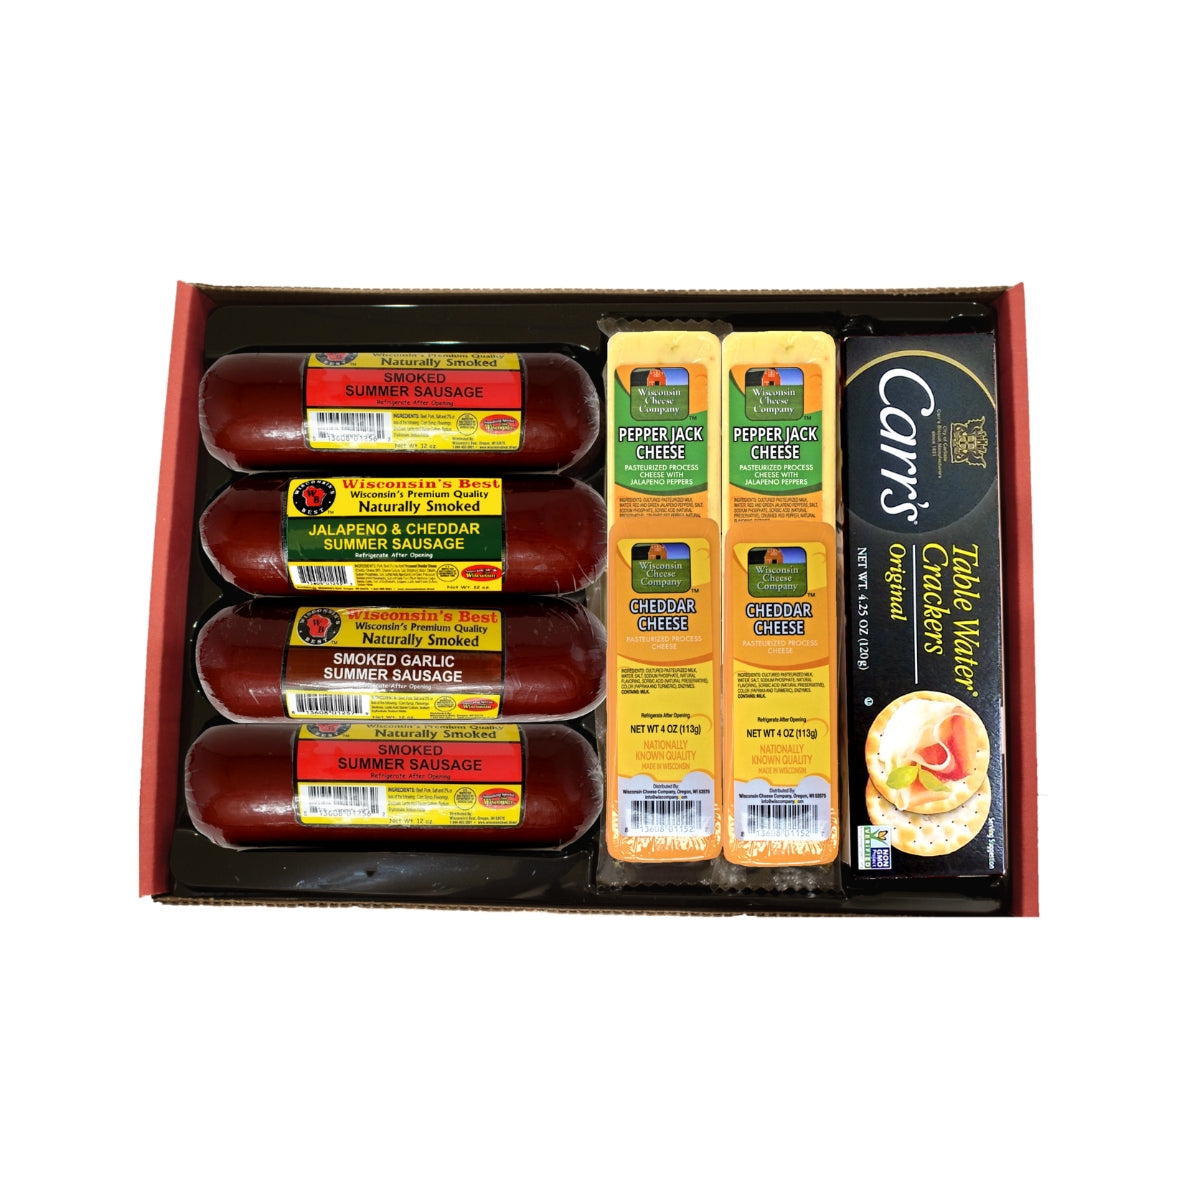 Wisconsin Ultimate Mancave Summer Sausage & Pepper Jack & Cheddar Cheese & Cracker Gift Box, Great Family Gourmet Gift